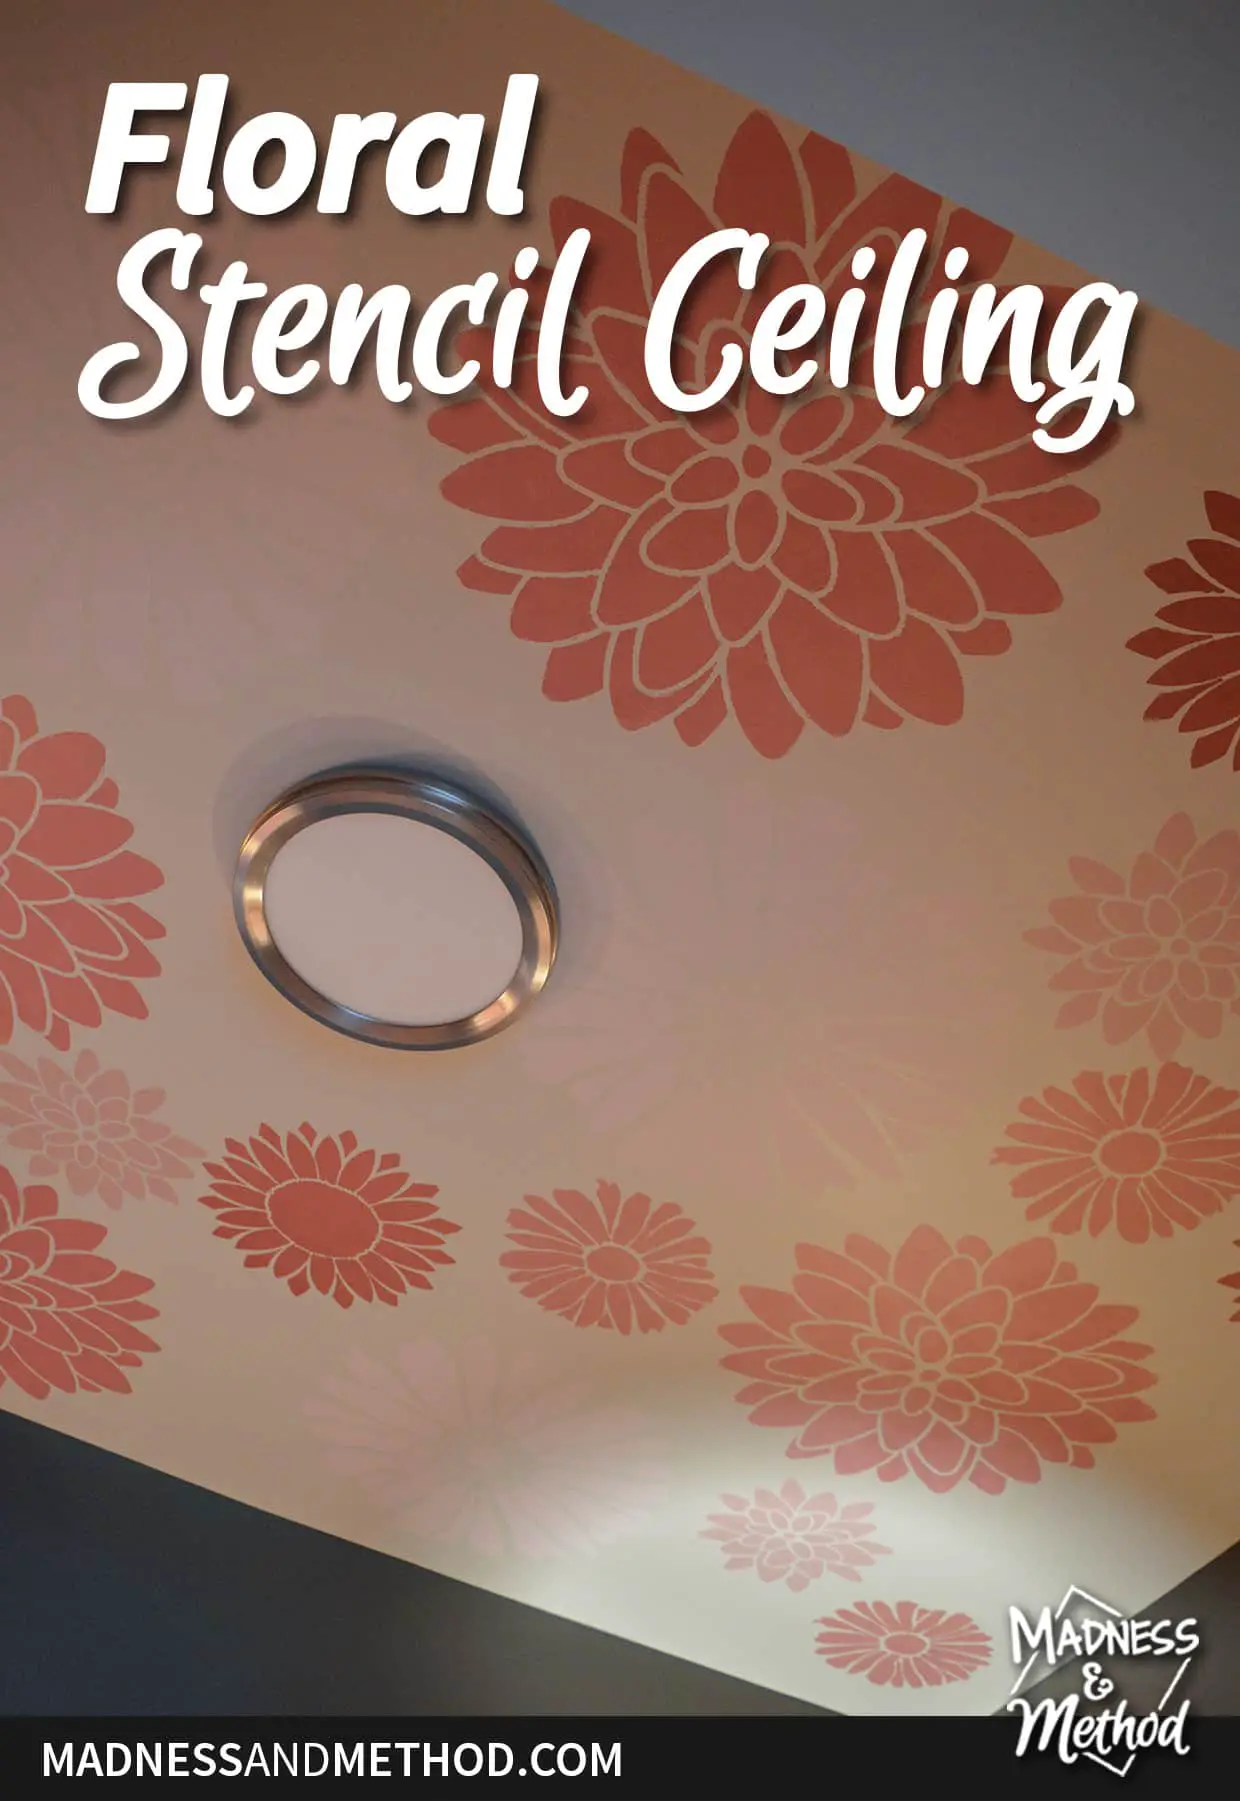 floral stencil ceiling graphic